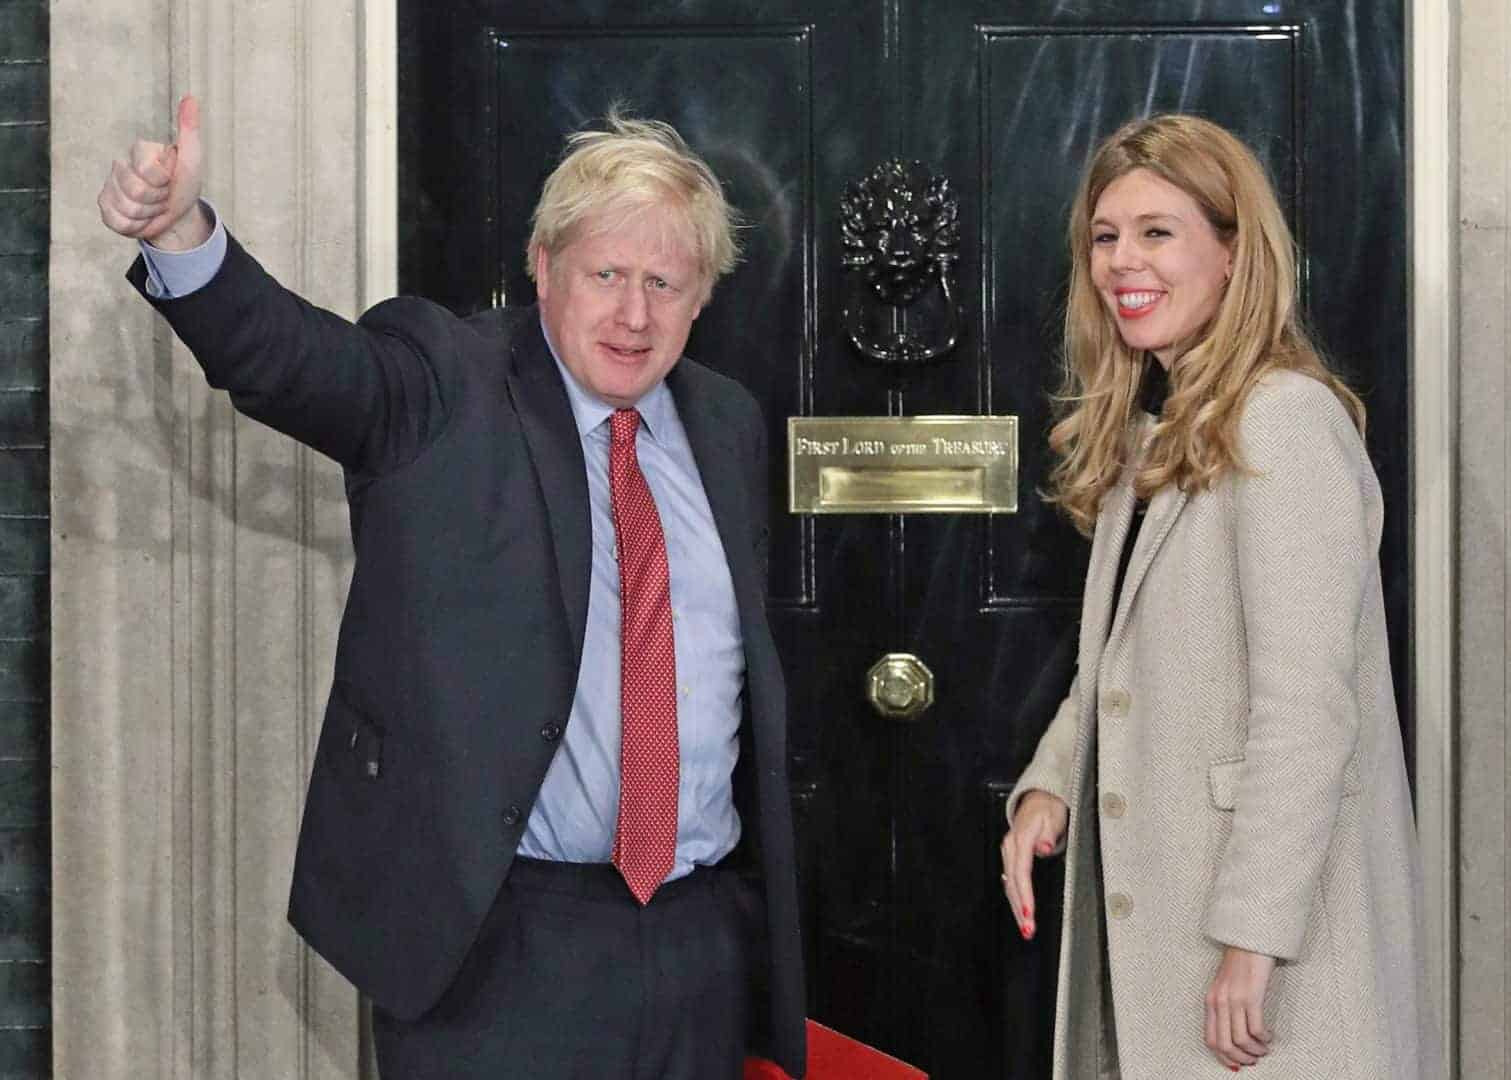 Boris Johnson’s £15,000 holiday gift from business tycoon